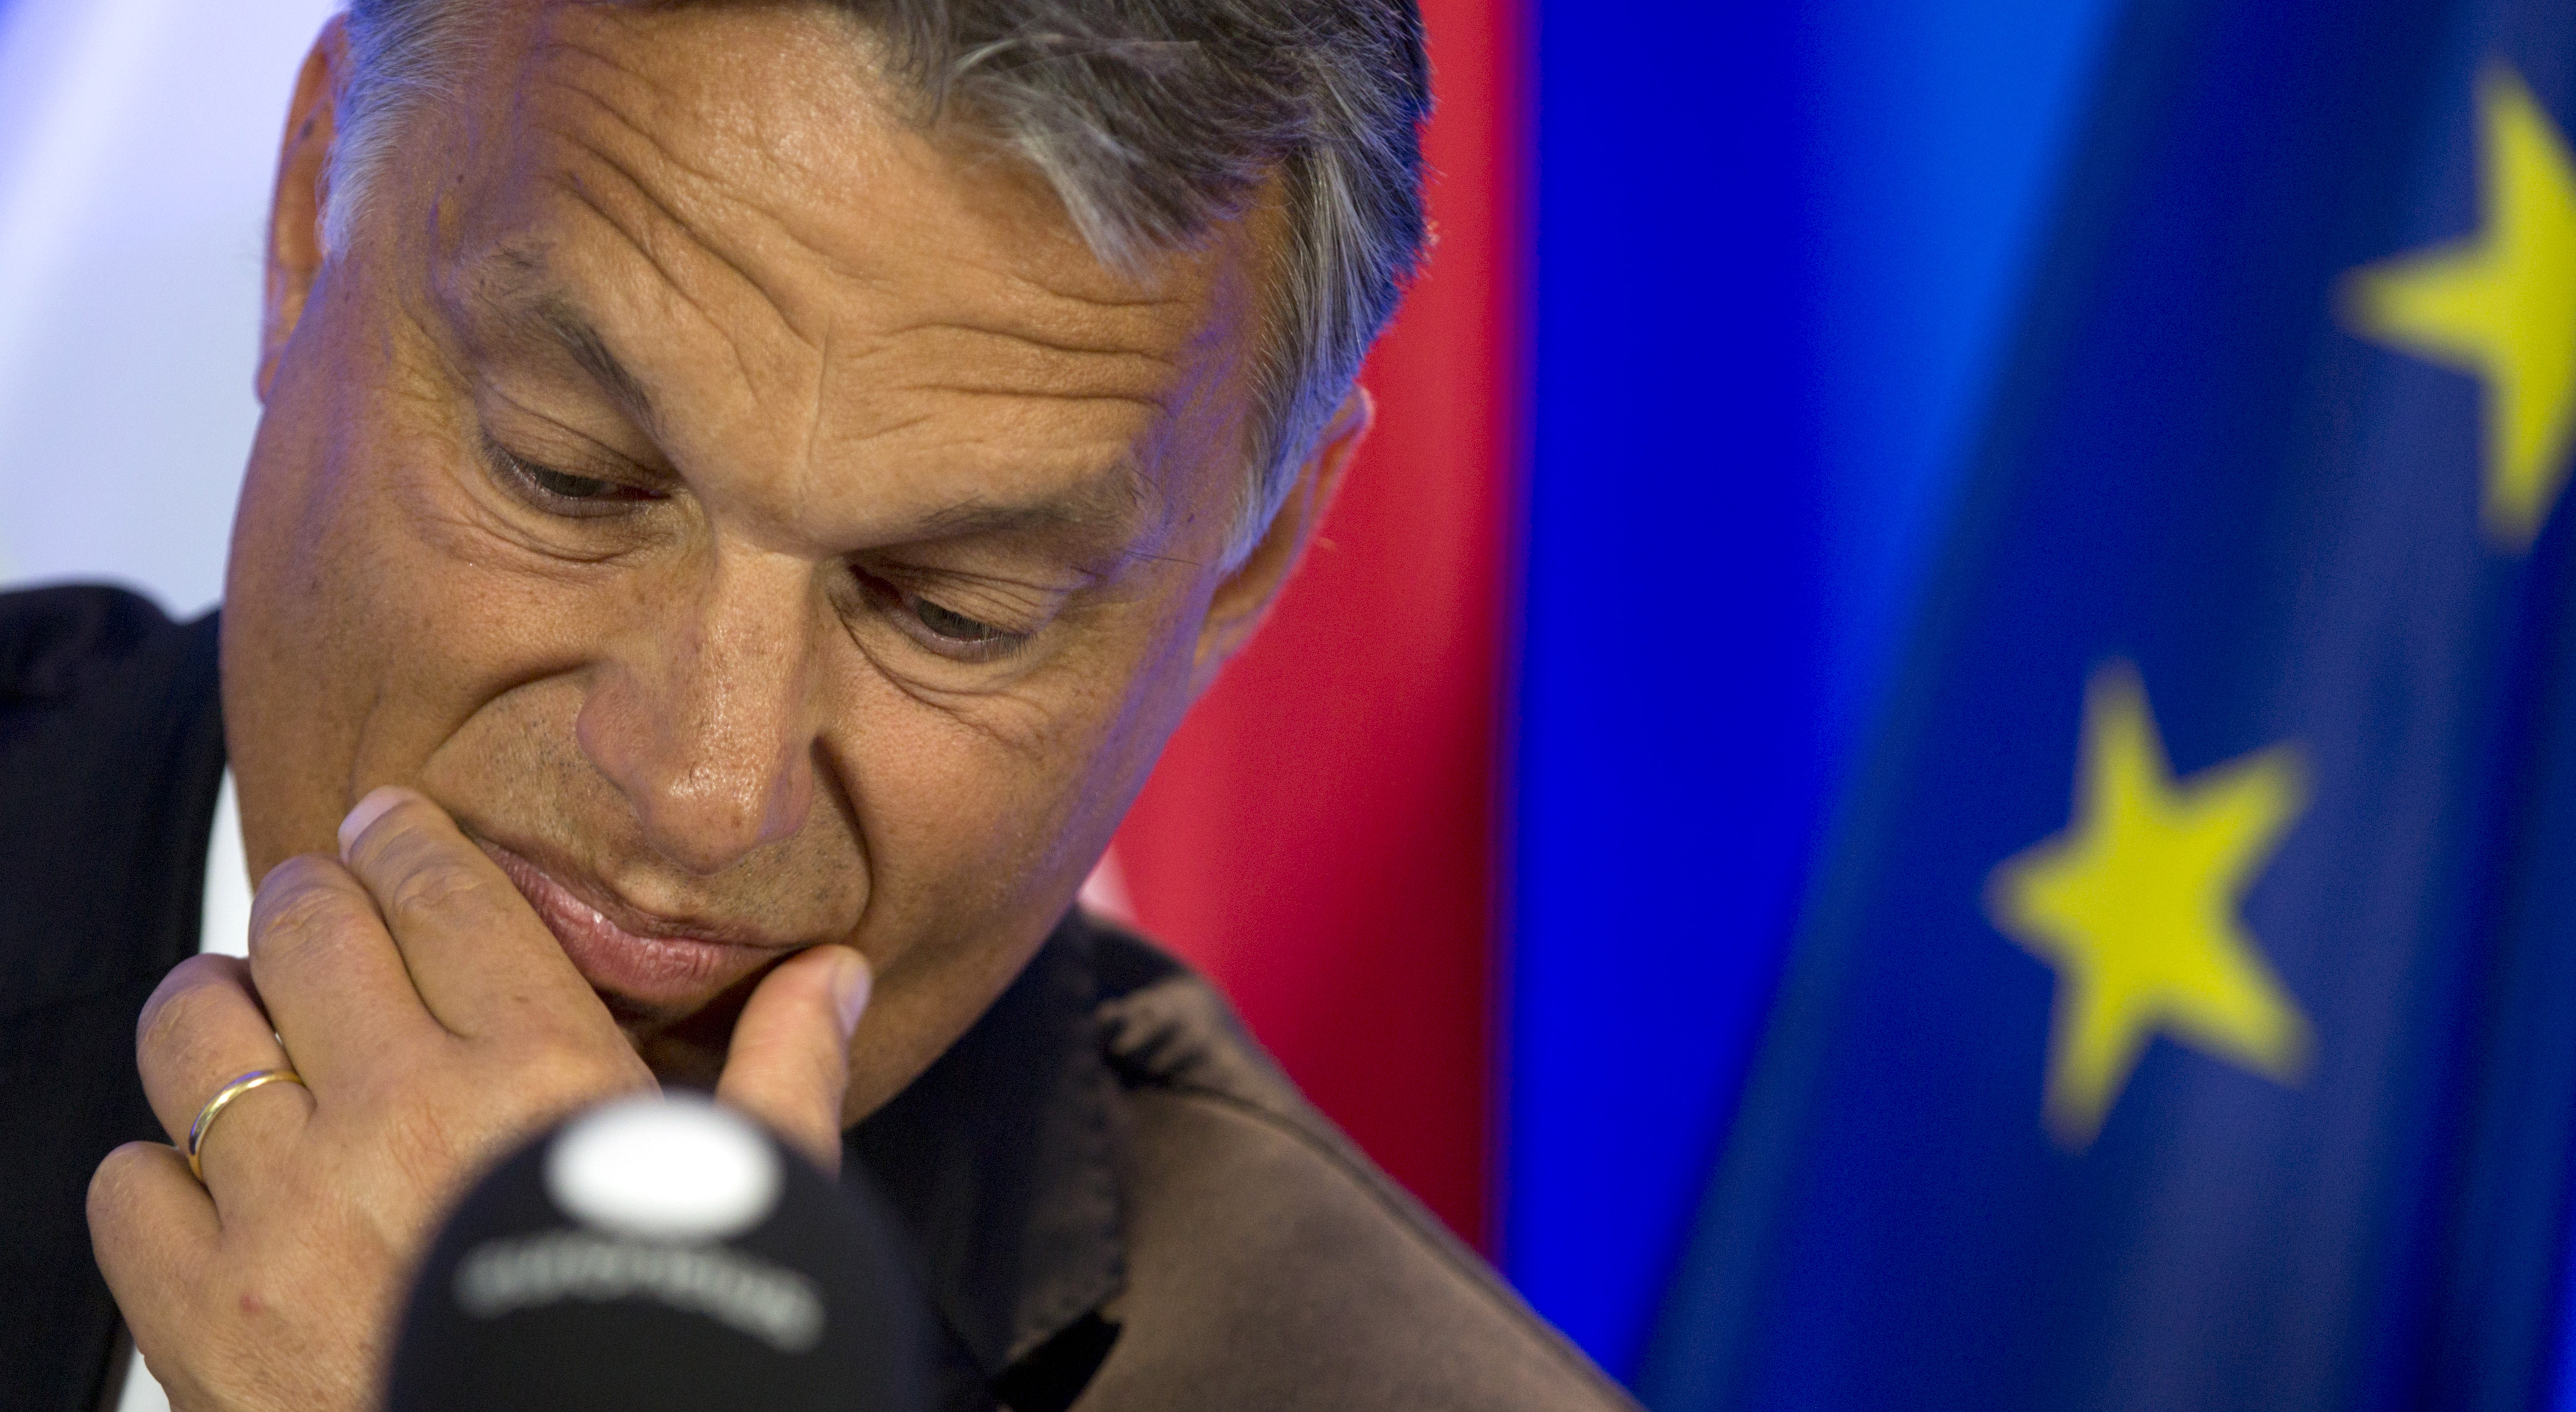 FILE - In this Thursday, Sept. 3, 2015 file photo, Hungarian Prime Minister Viktor Orban pauses before speaking during a media conference at the EU Council building in Brussels. The Baltic countries, as well as Hungary, Poland, Slovakia and the Czech Republic, have all rejected mandatory refugee quotas, often with the argument that they donu0092t want their relatively homogenous societies to become multicultural. EU officials and human rights groups say theyu0092ve been disappointed by the animosity toward asylum-seekers in countries from which hundreds of thousands of people fled communist dictatorships just decades ago. Viktor Orbanu0092s government is refusing to accept a single refugee under the EU plans and resisting their attempts to cross the country to reach more welcoming countries like Germany and Sweden. Slovakia has offered to accept 200 people - as long as most of them are Christians. Photo: AP